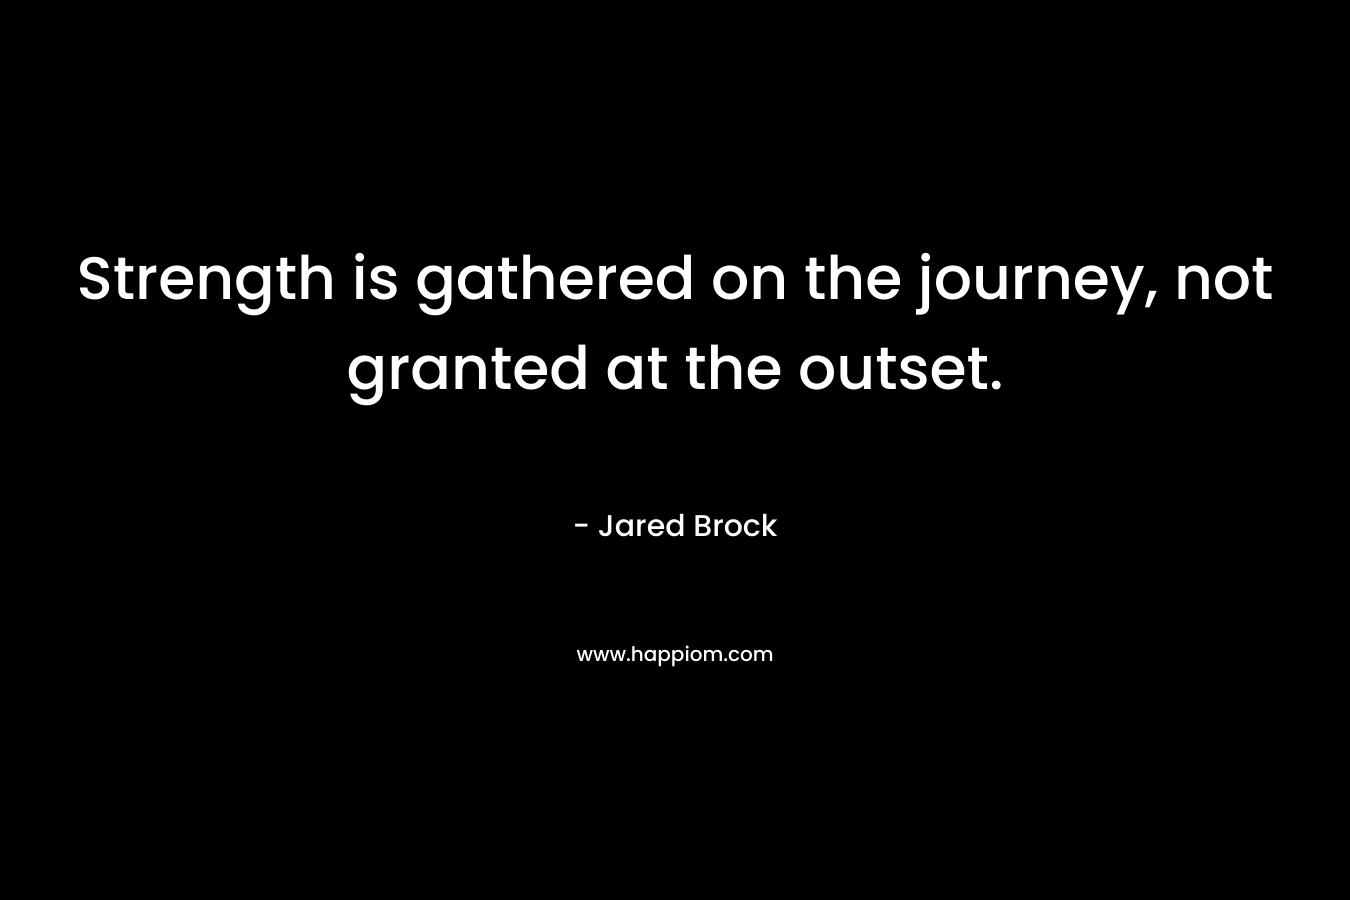 Strength is gathered on the journey, not granted at the outset.